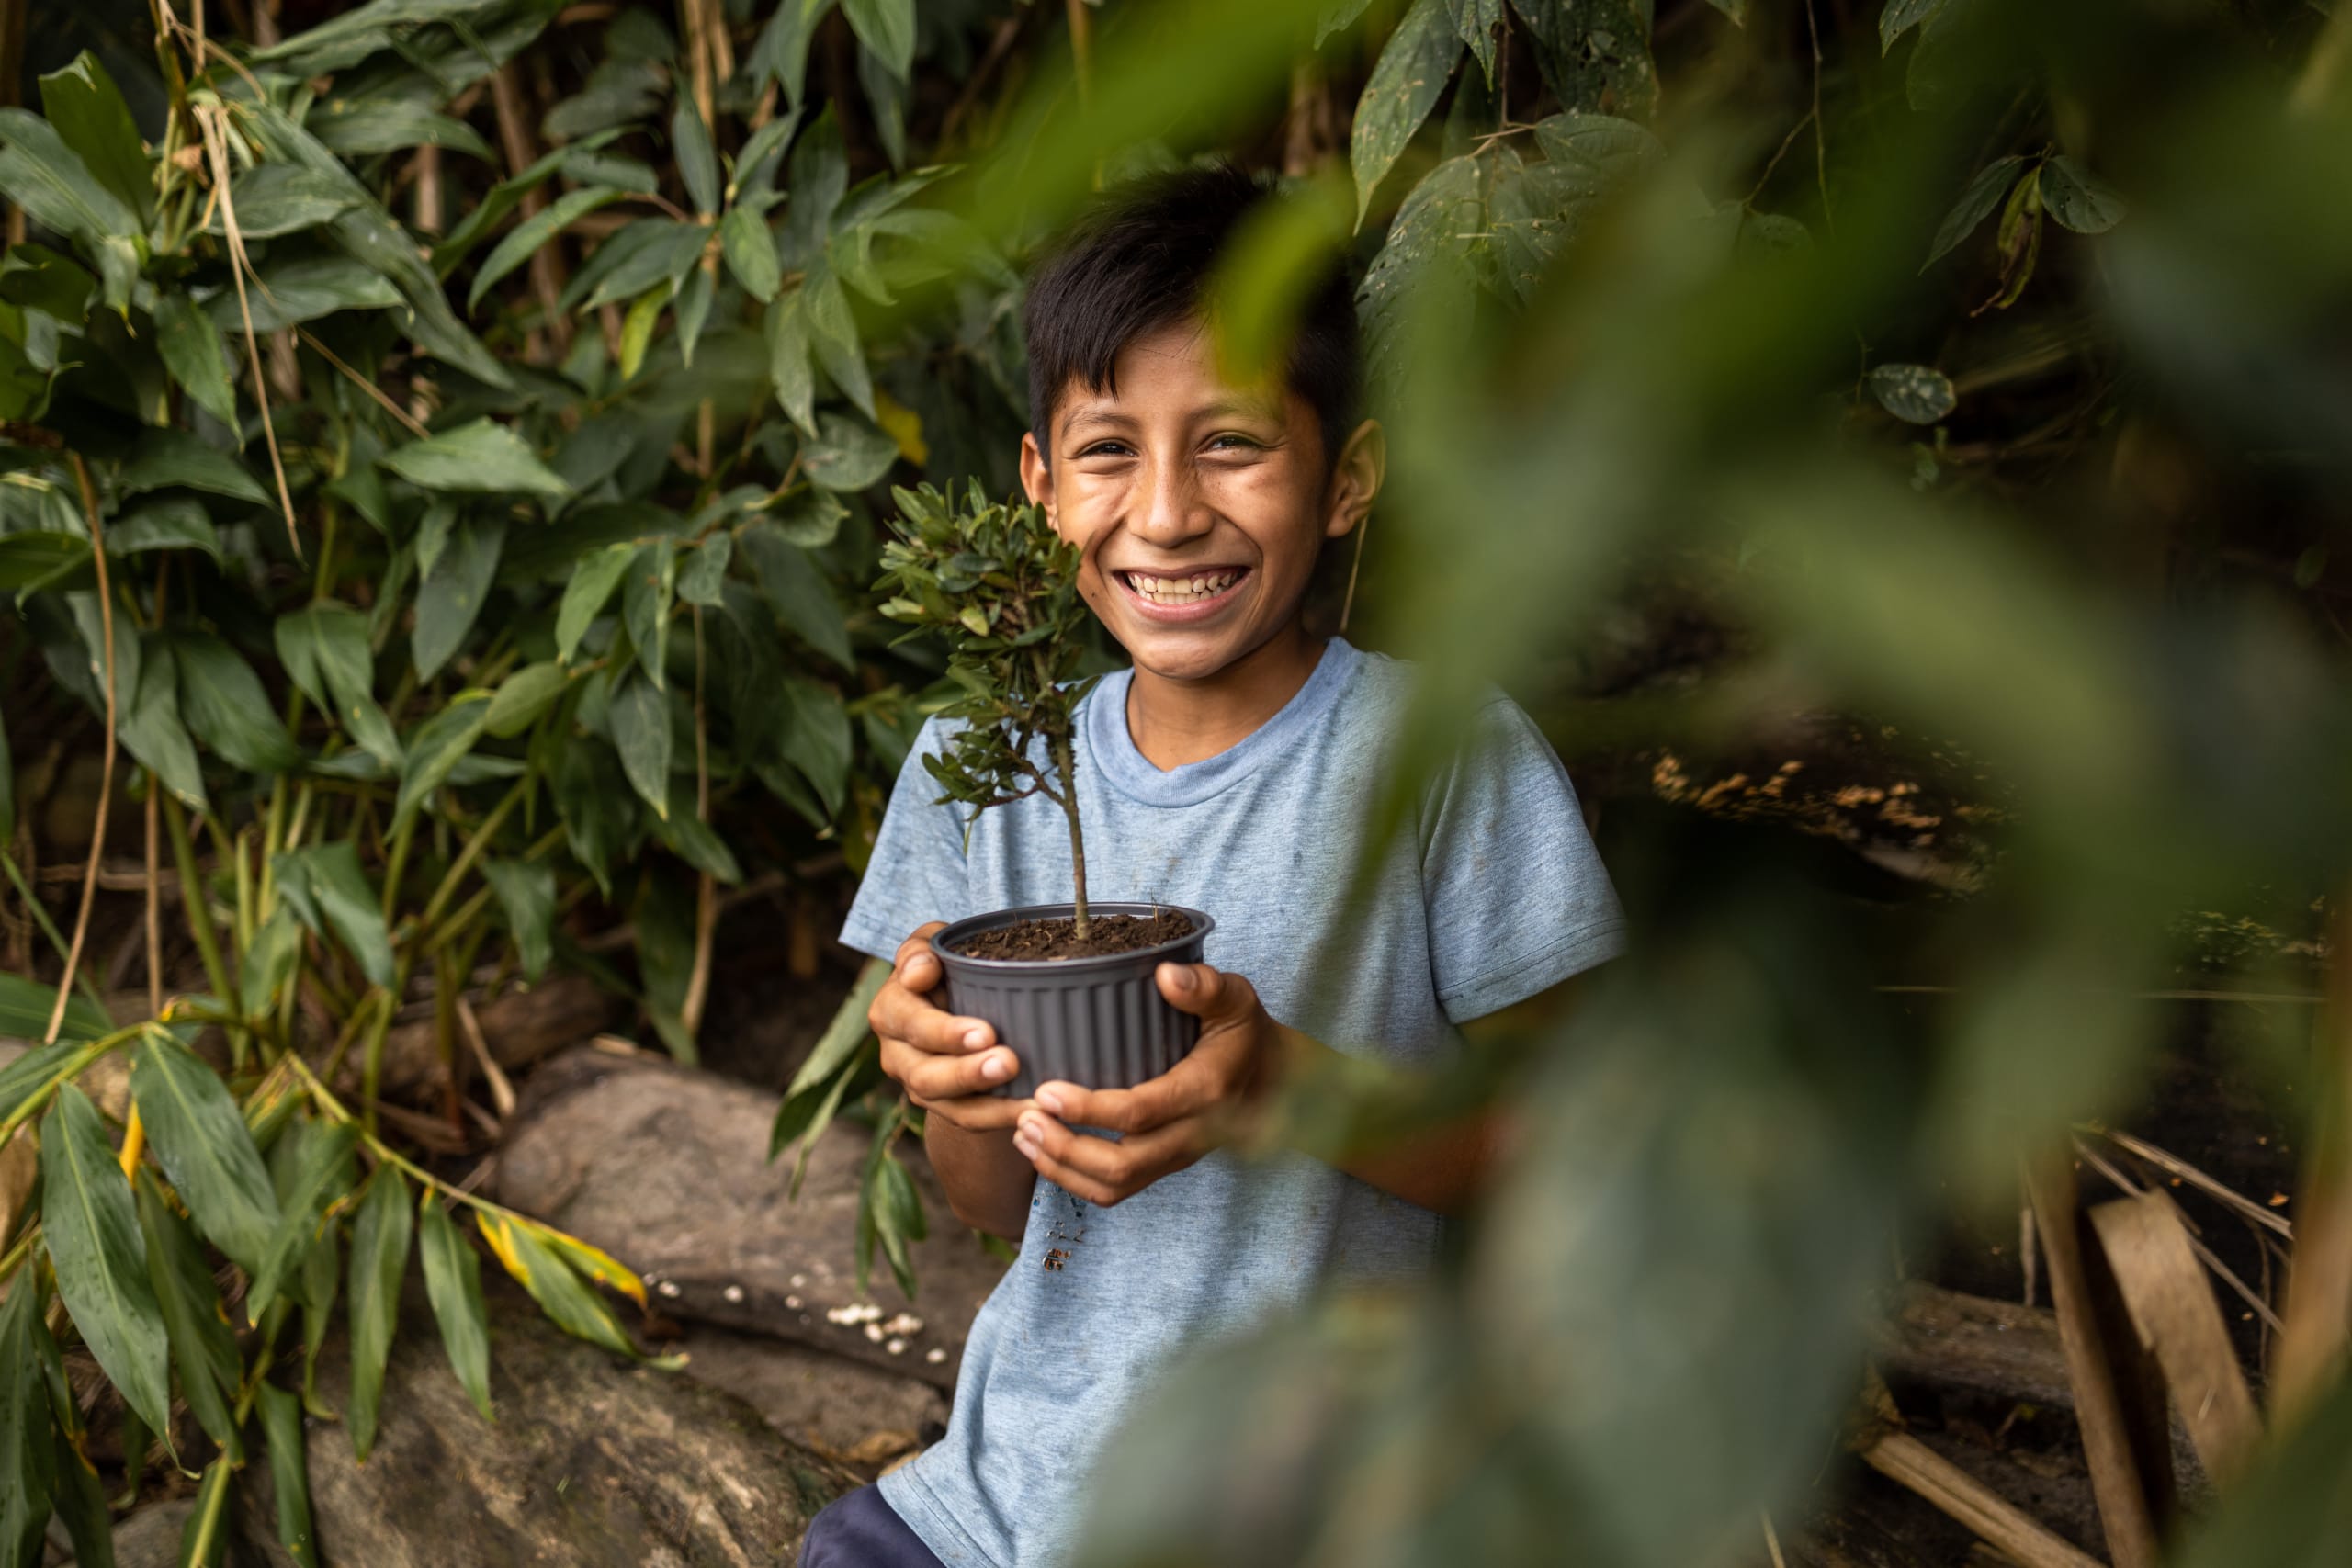 A boy in a blue shirt stands under a tree and holds a pot with a plant in it.